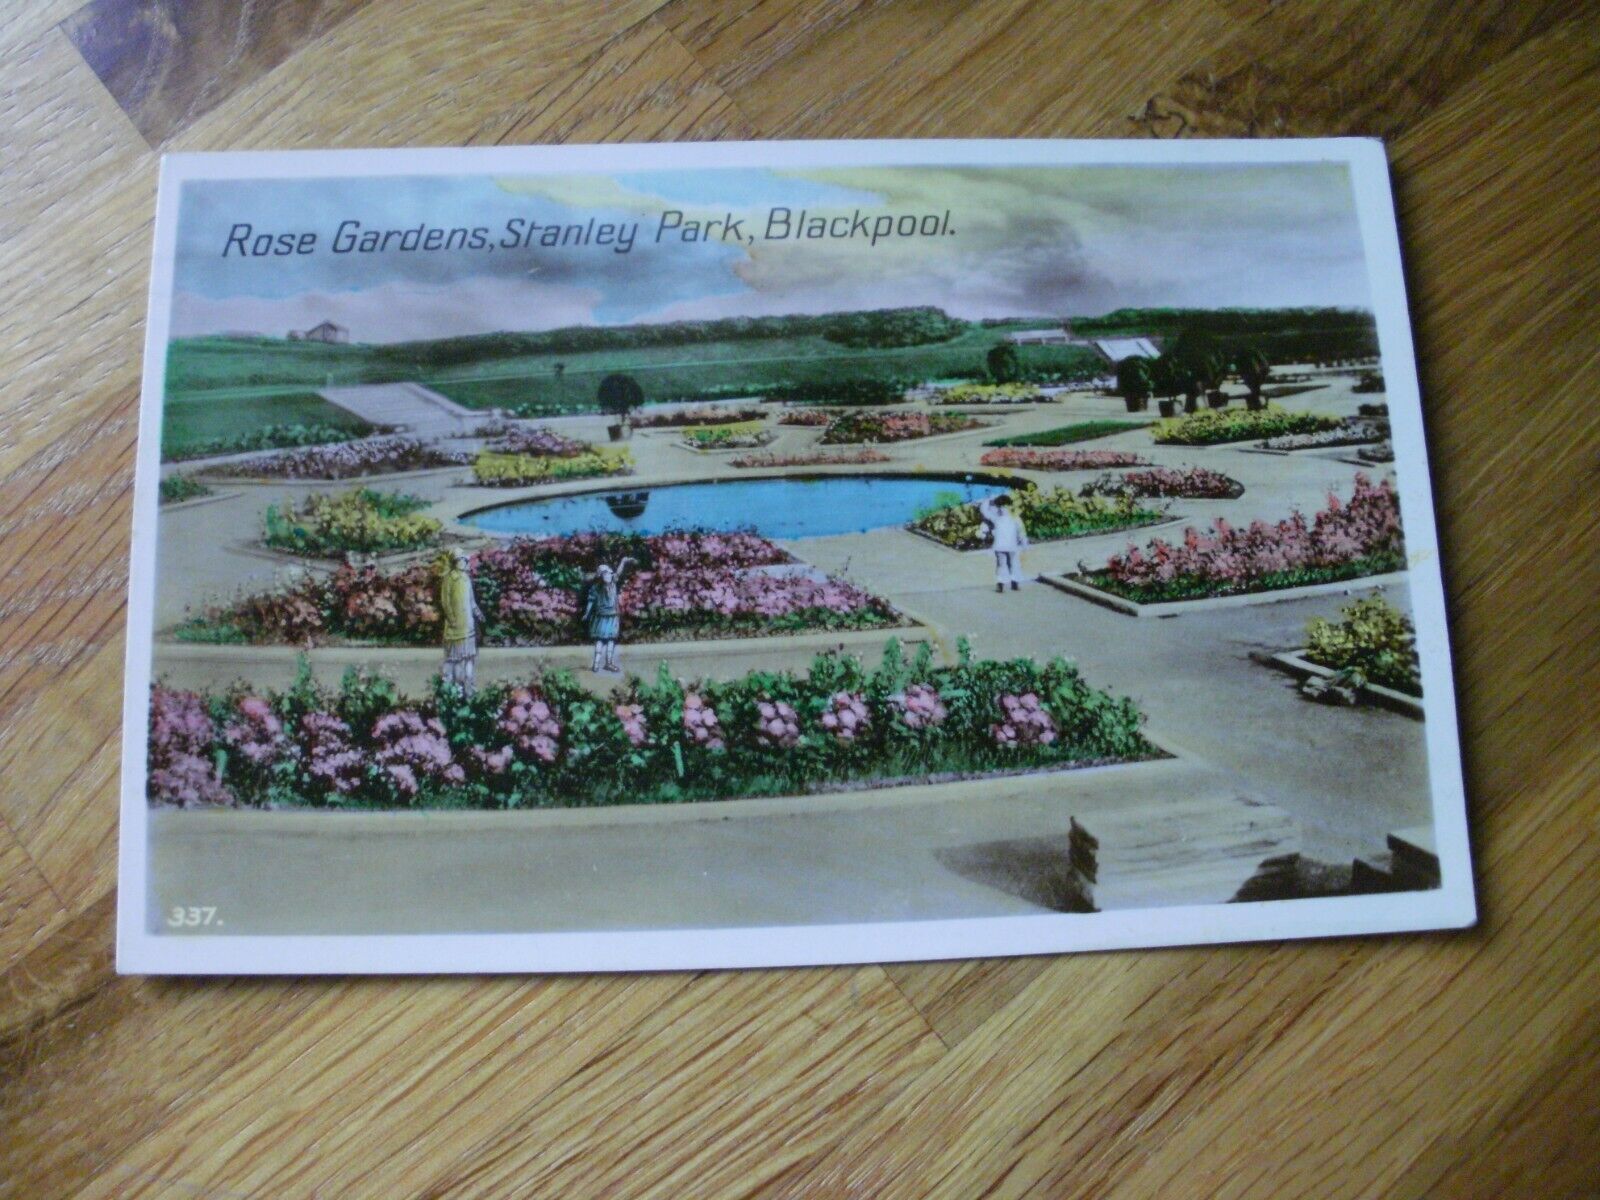 House Clearance - REAL PHOTO VINTAGE POSTCARD, ROSE GARDENS, STANLEY PARK, BLACKPOOL 1931